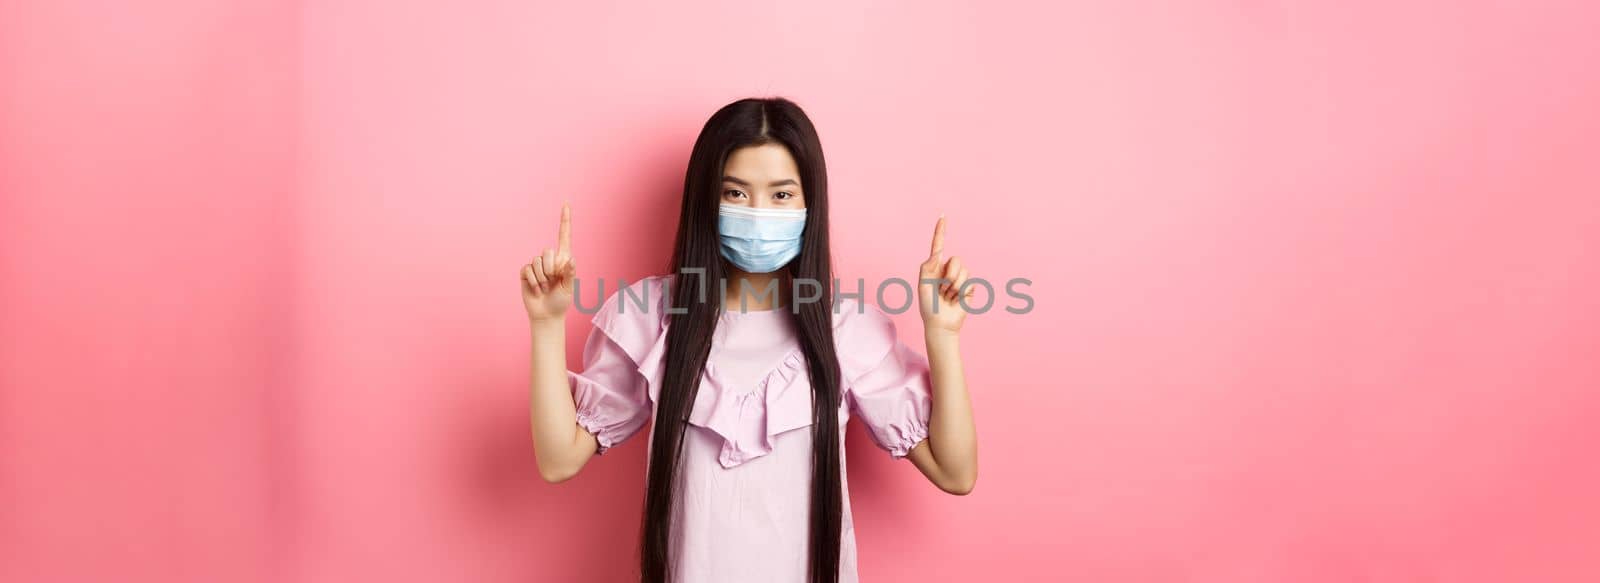 Coronavirus, quarantine and lifestyle concept. Beautiful asian woman in sterile medical mask pointing fingers up, smiling with eyes and look confident, standing against pink background.